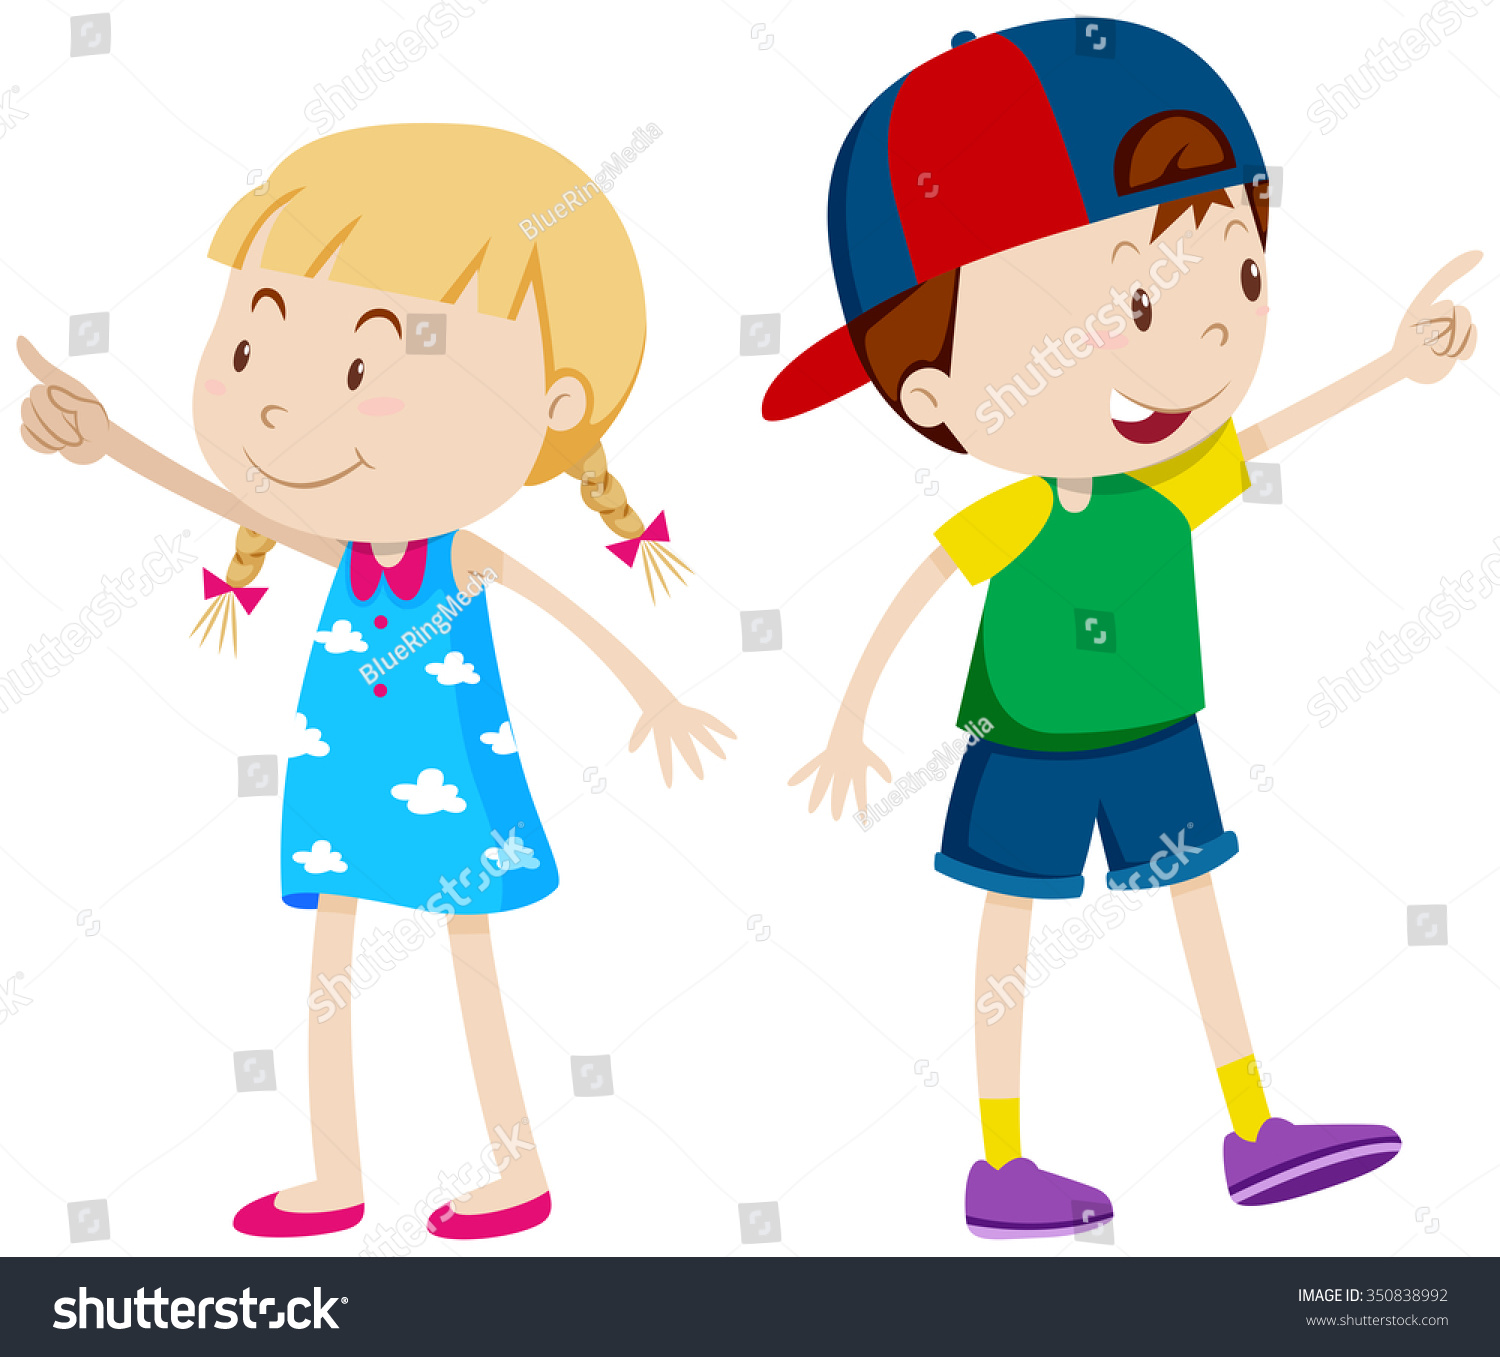 boy and girl clipart free - photo #44